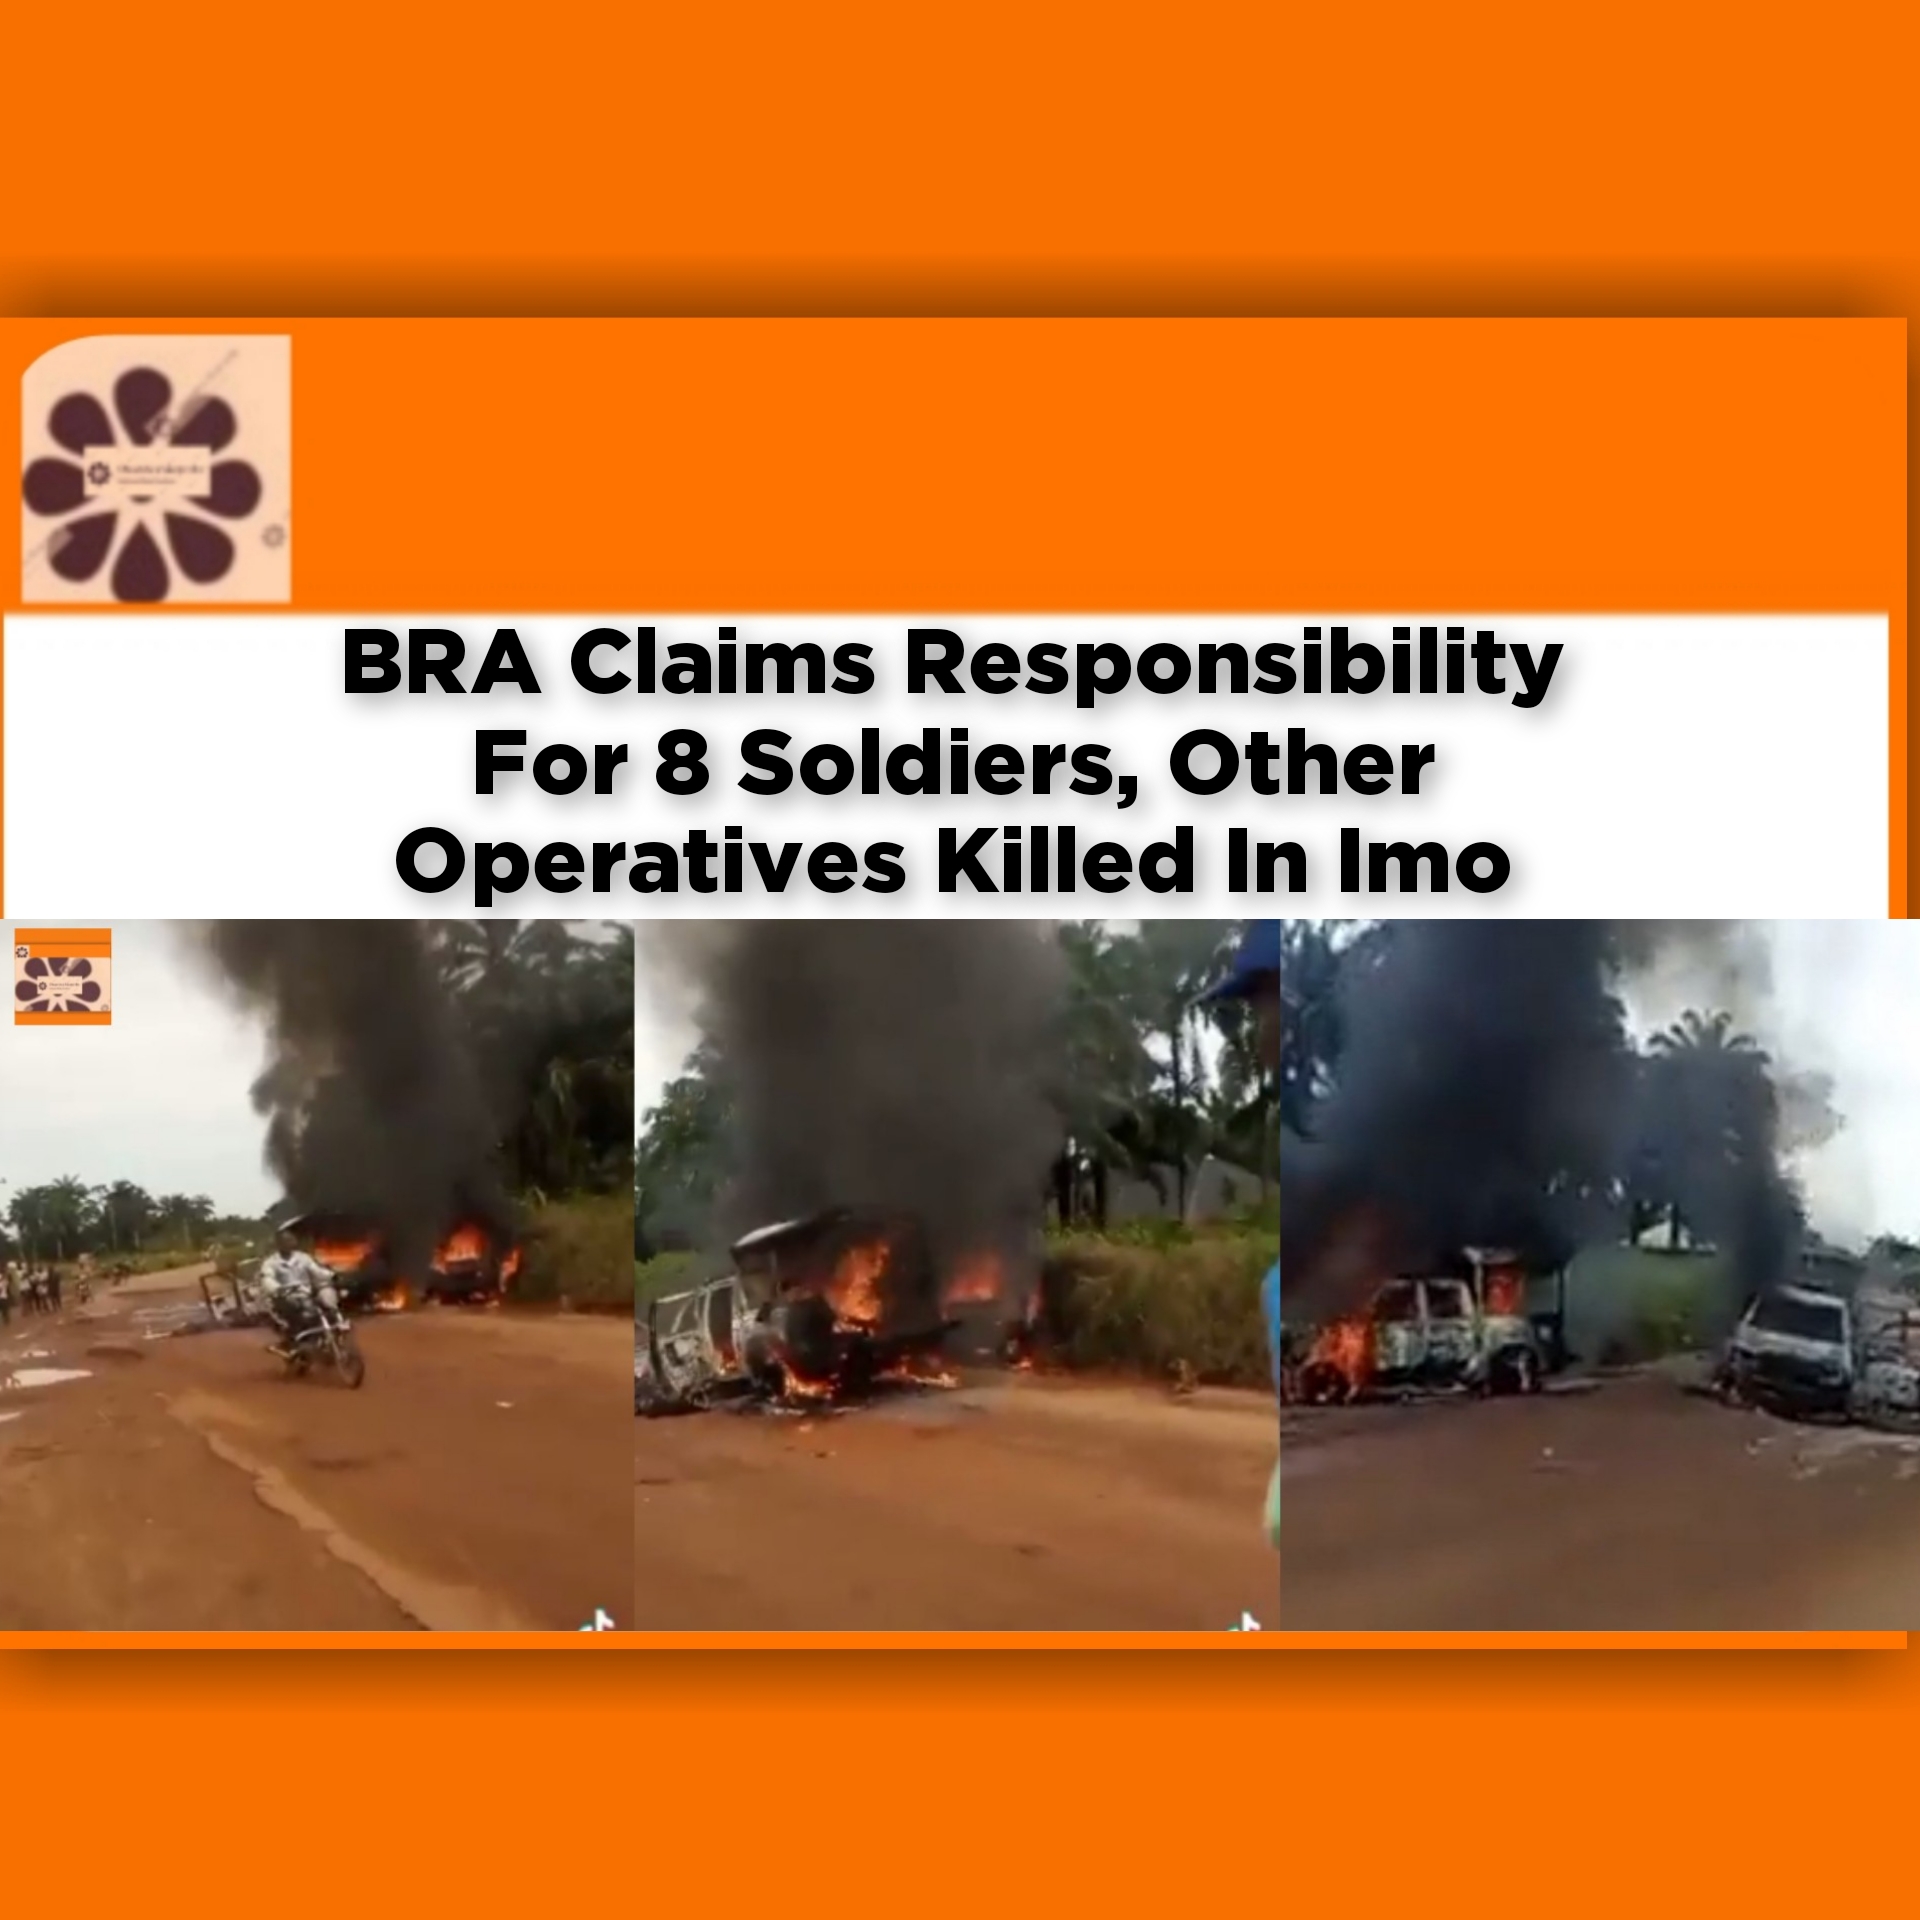 BRA Claims Responsibility For 8 Soldiers, Other Operatives Killed In Imo ~ OsazuwaAkonedo #election